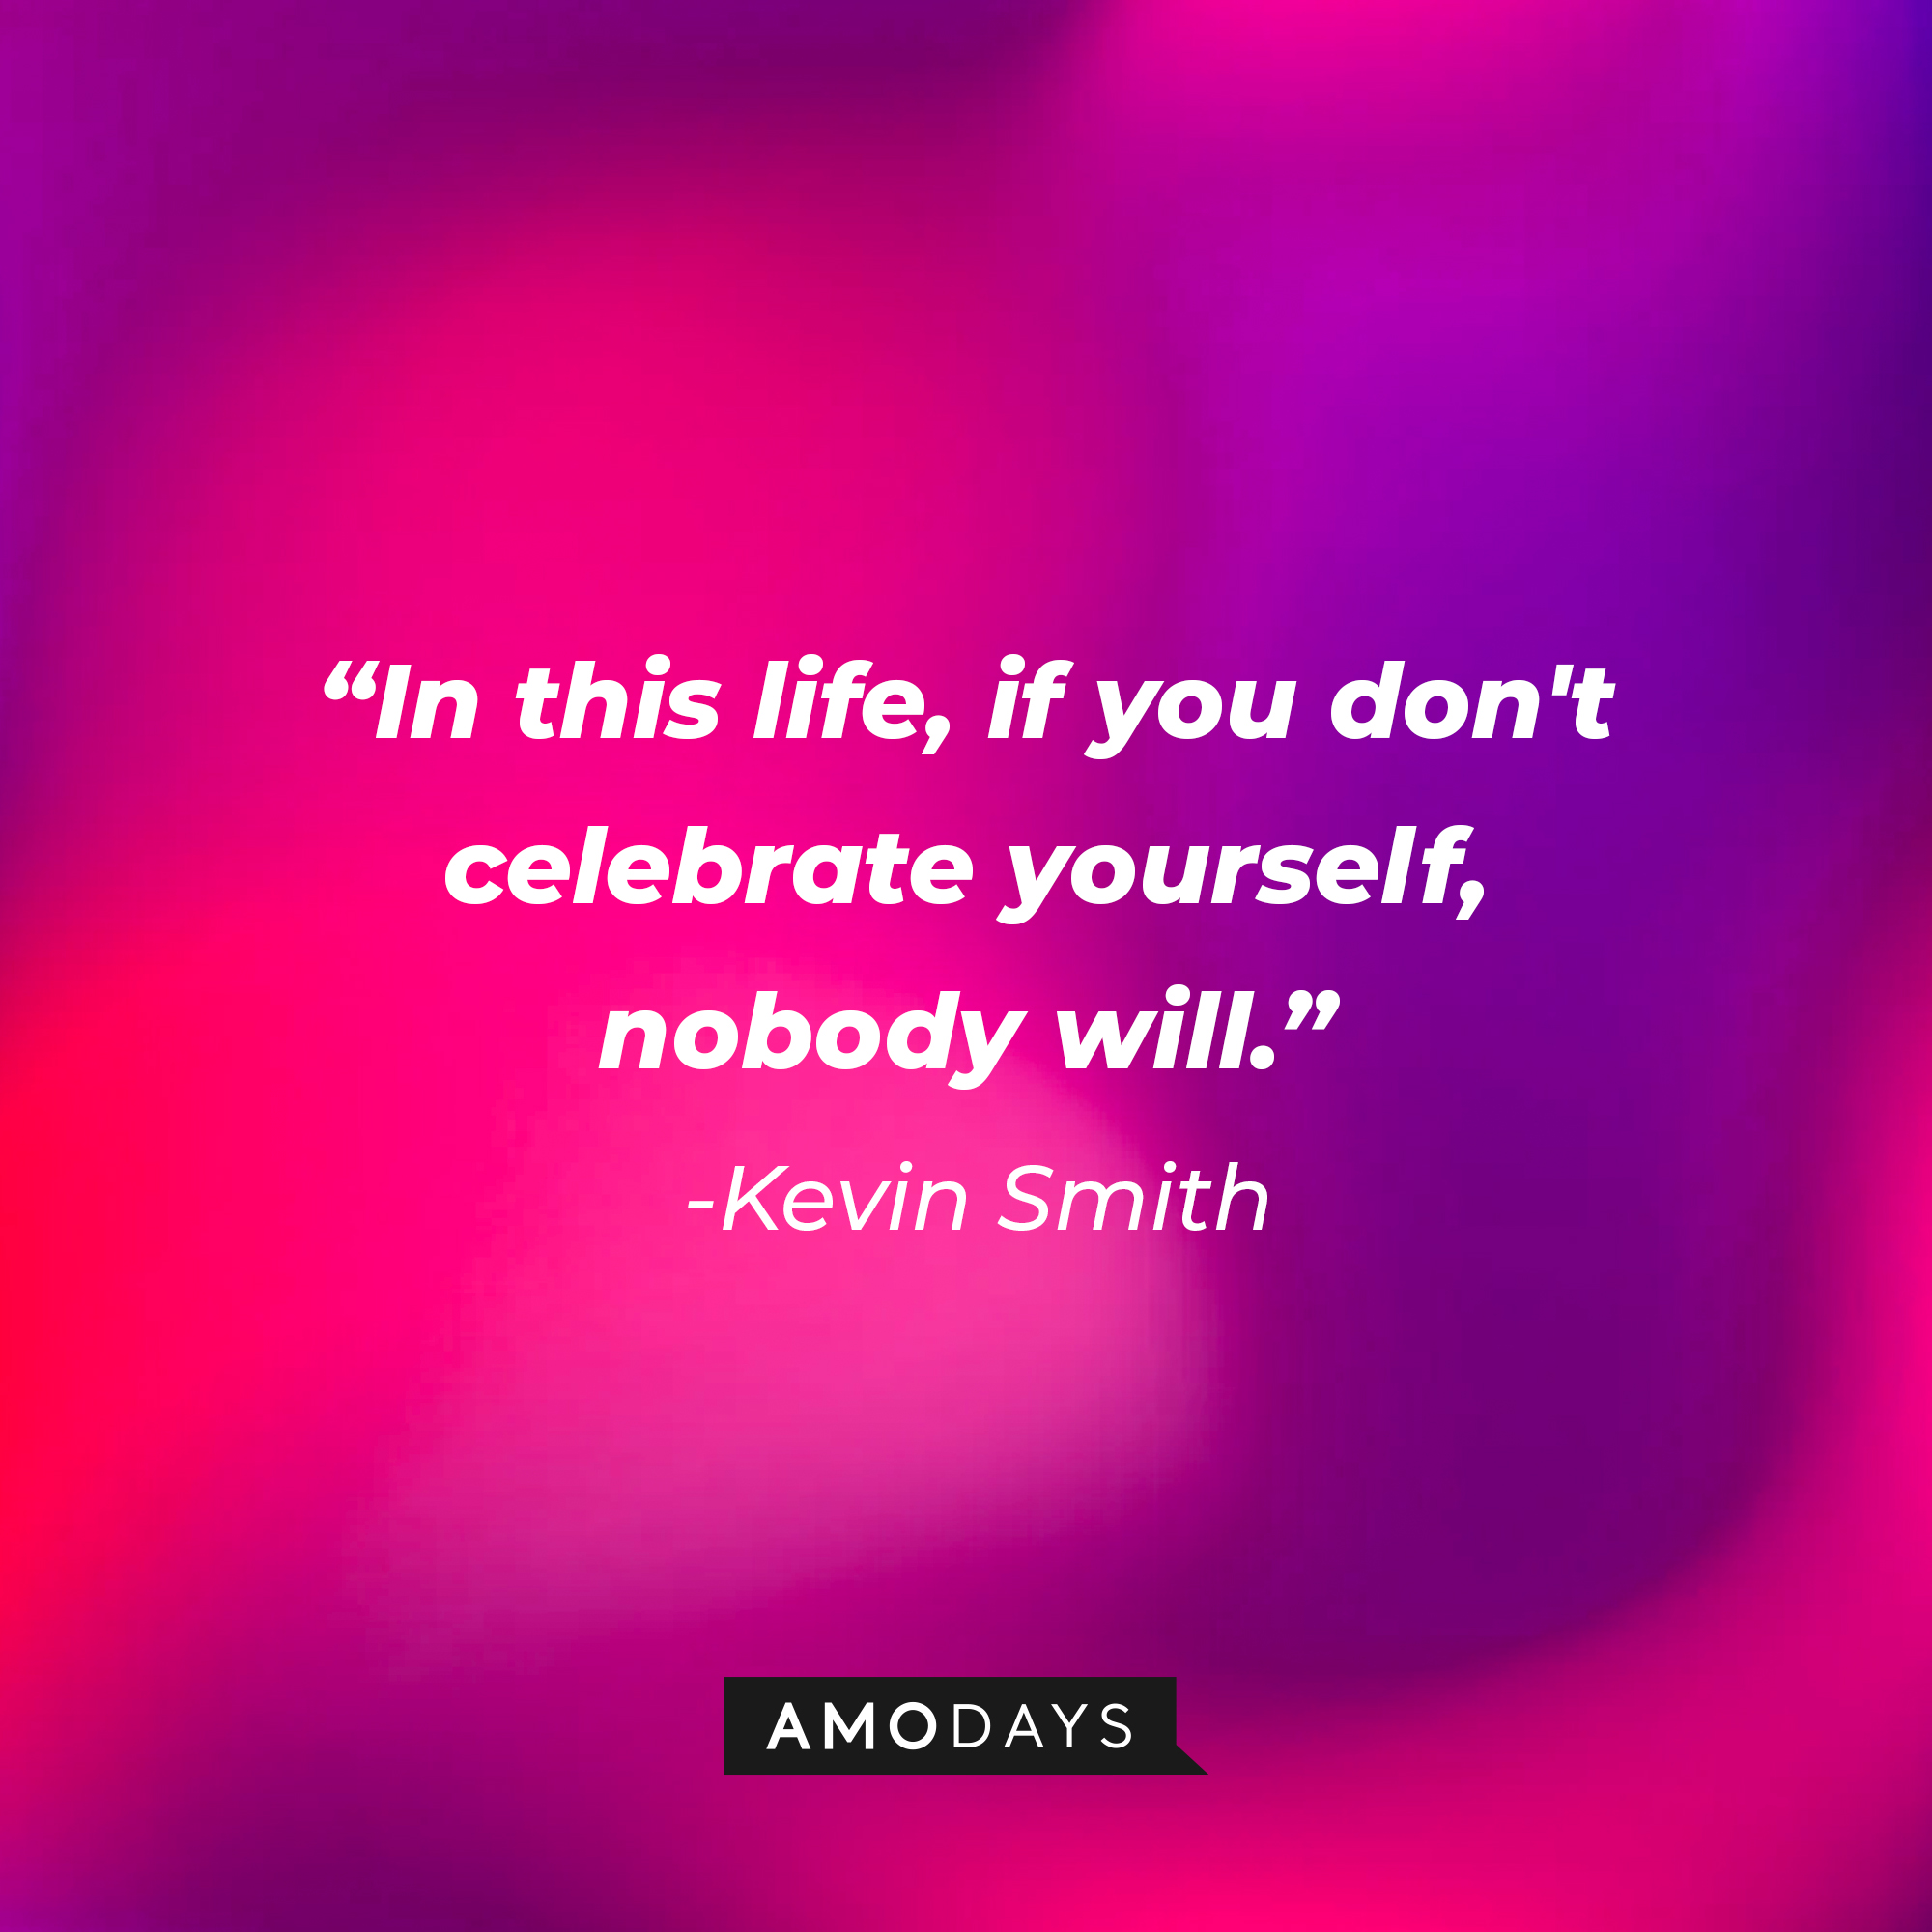 Kevin Smith’s quote: “In this life, if you don't celebrate yourself, nobody will.” | Source: AmoDays